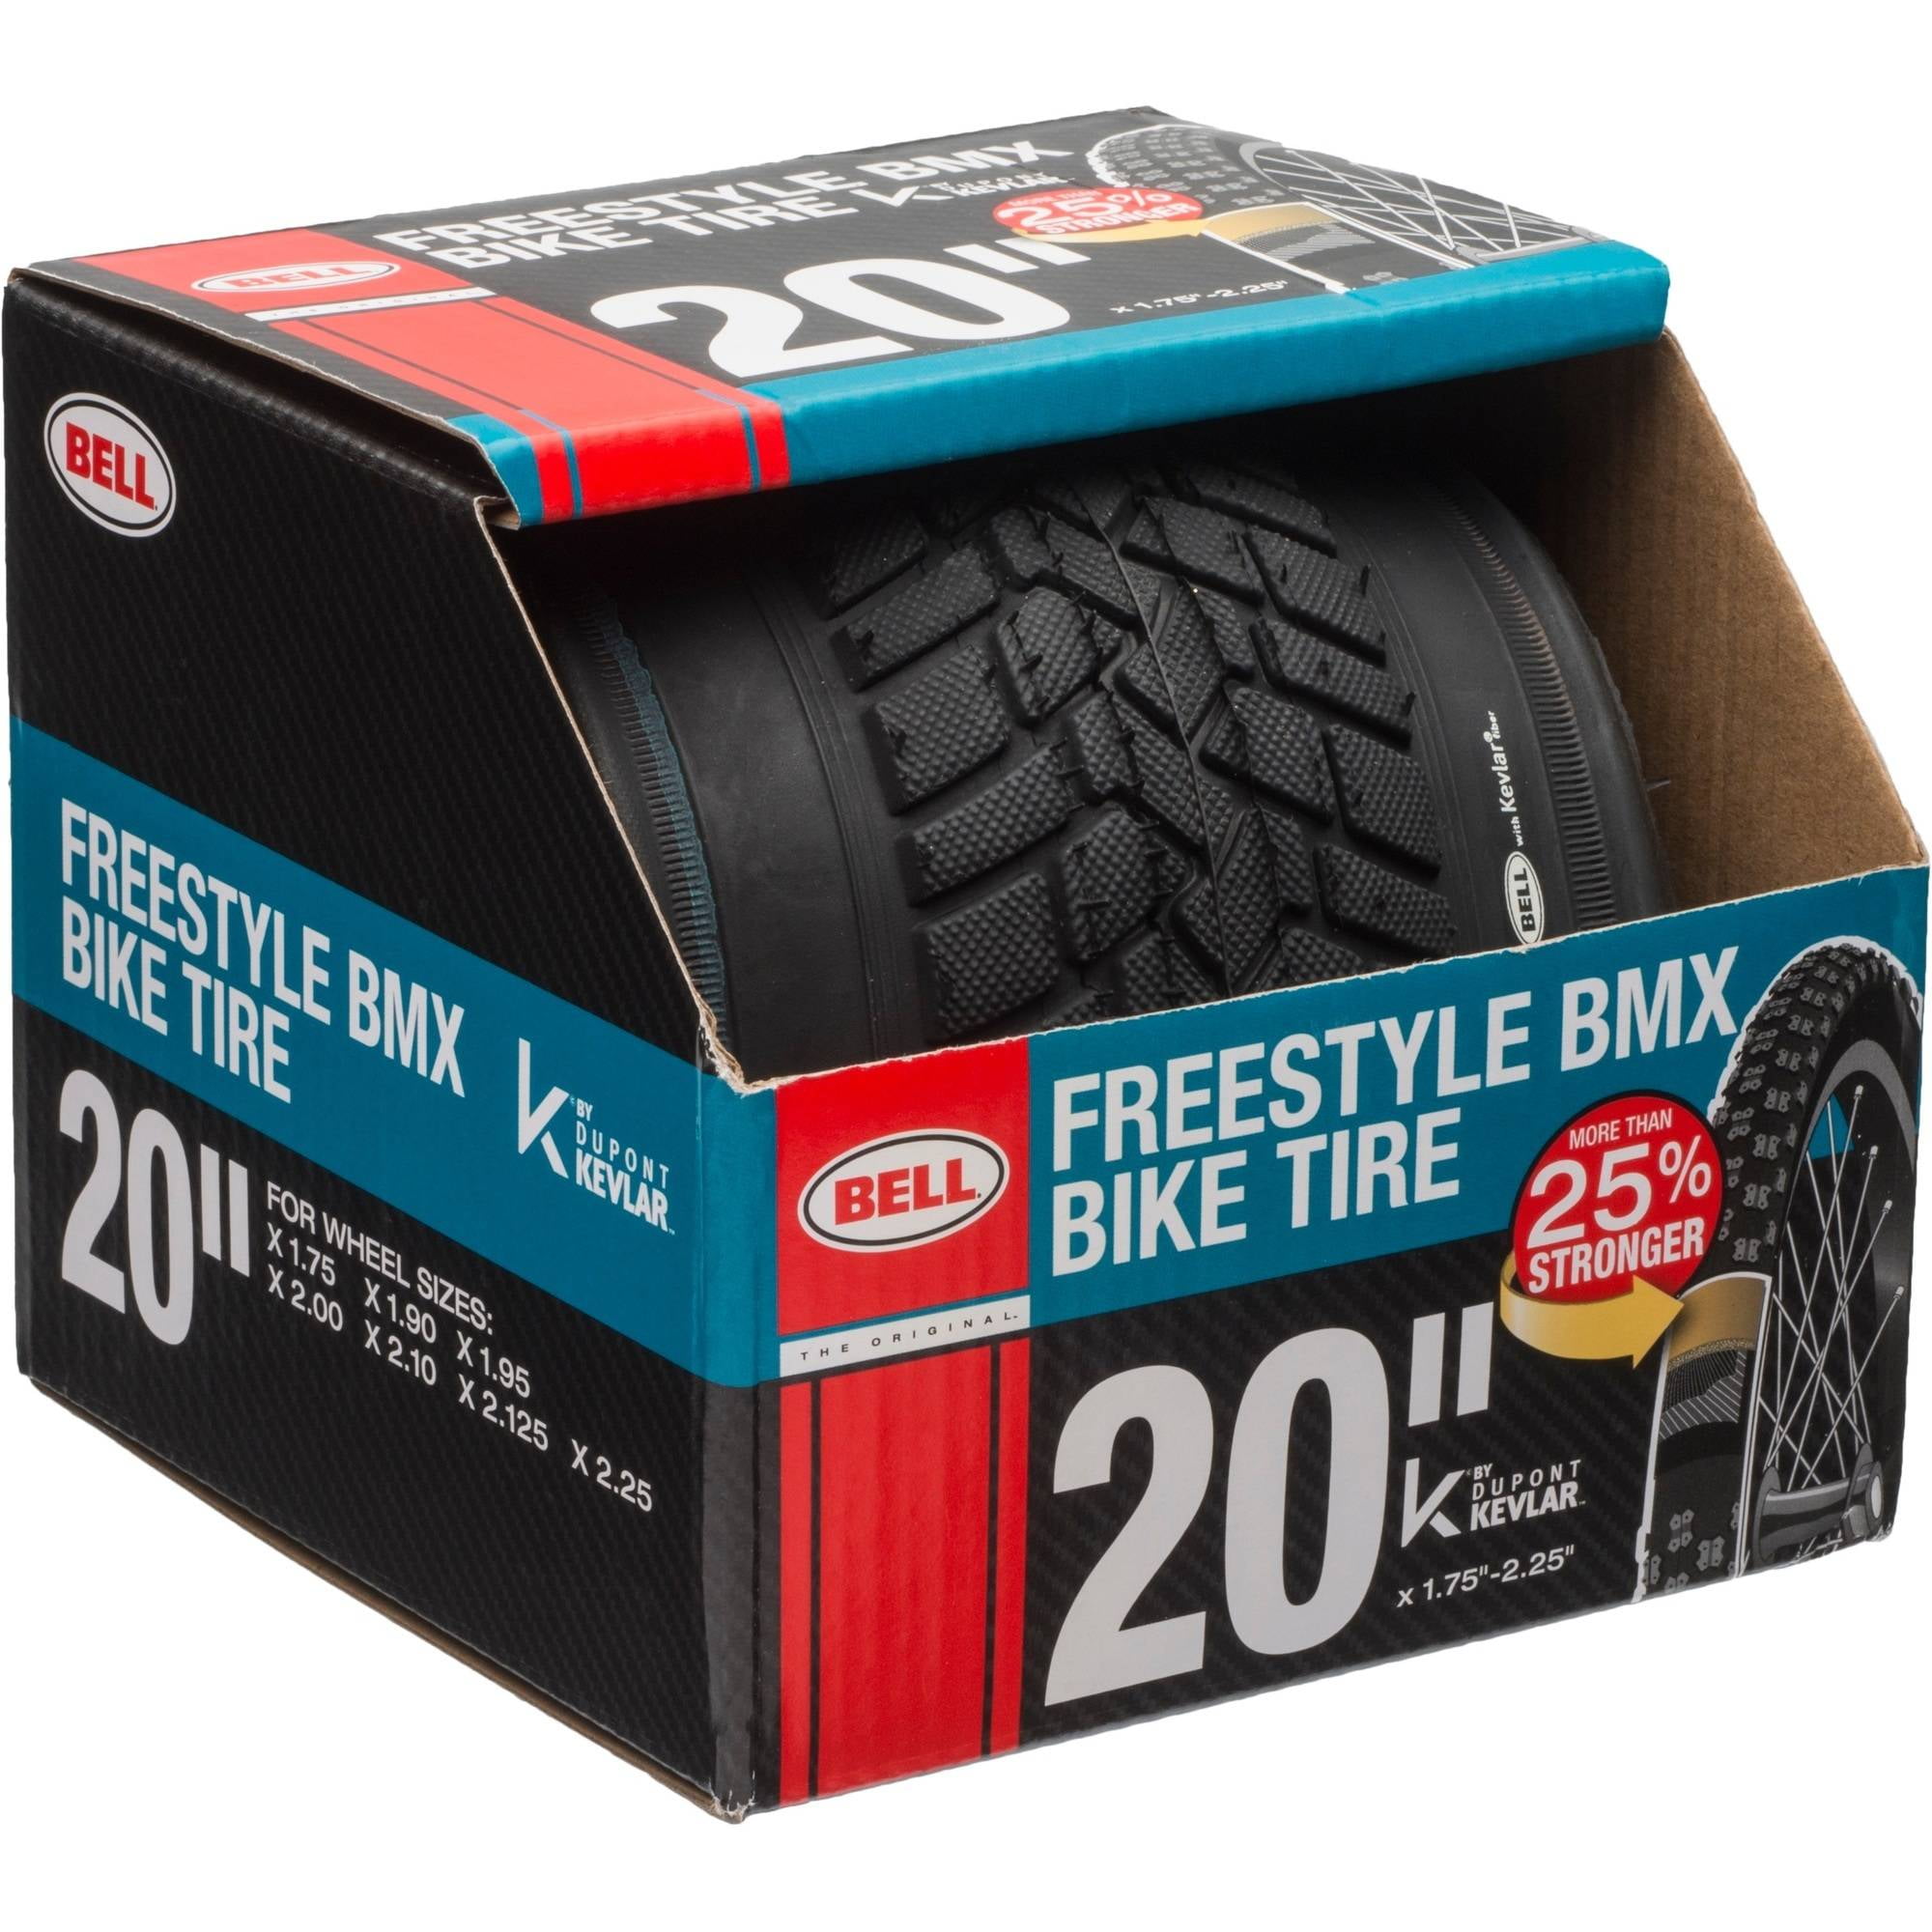 Freestyle Bicycle Tire No 7014698 Bell Sports Inc 3pk for sale online 